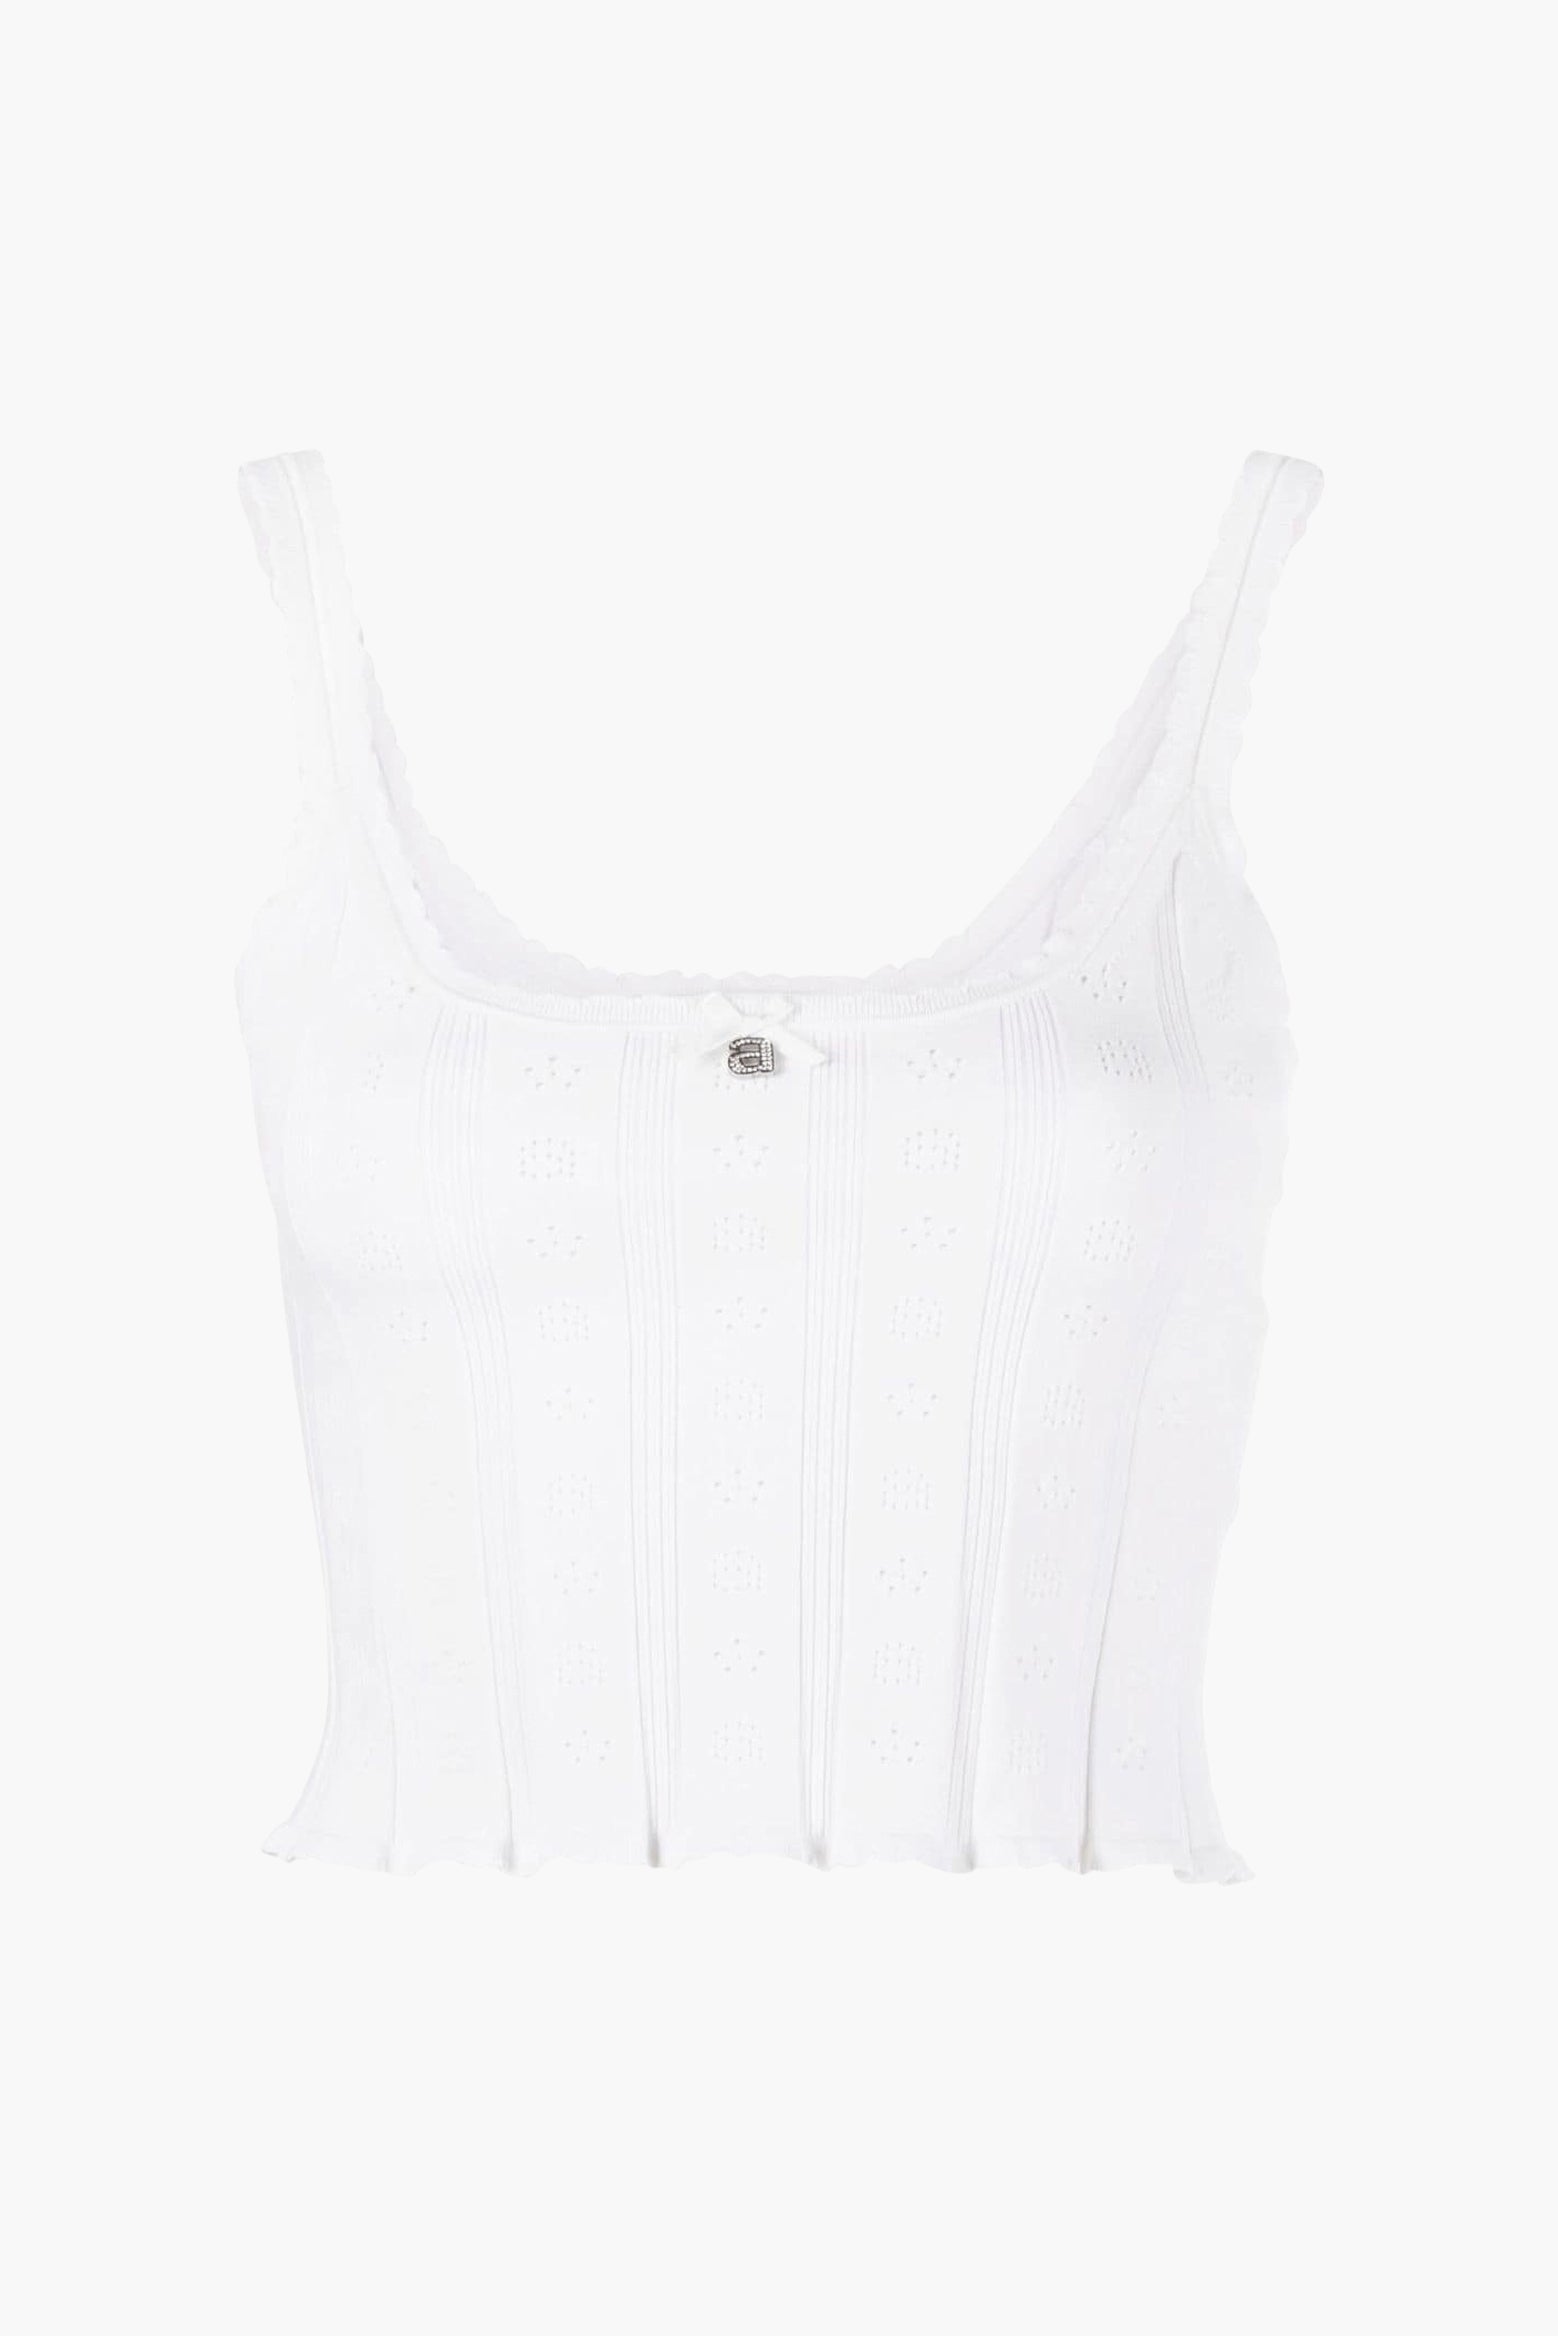 Alexander Wang Logo Pointelle Cami Tank in Soft White available at TNT The New Trend Australia.